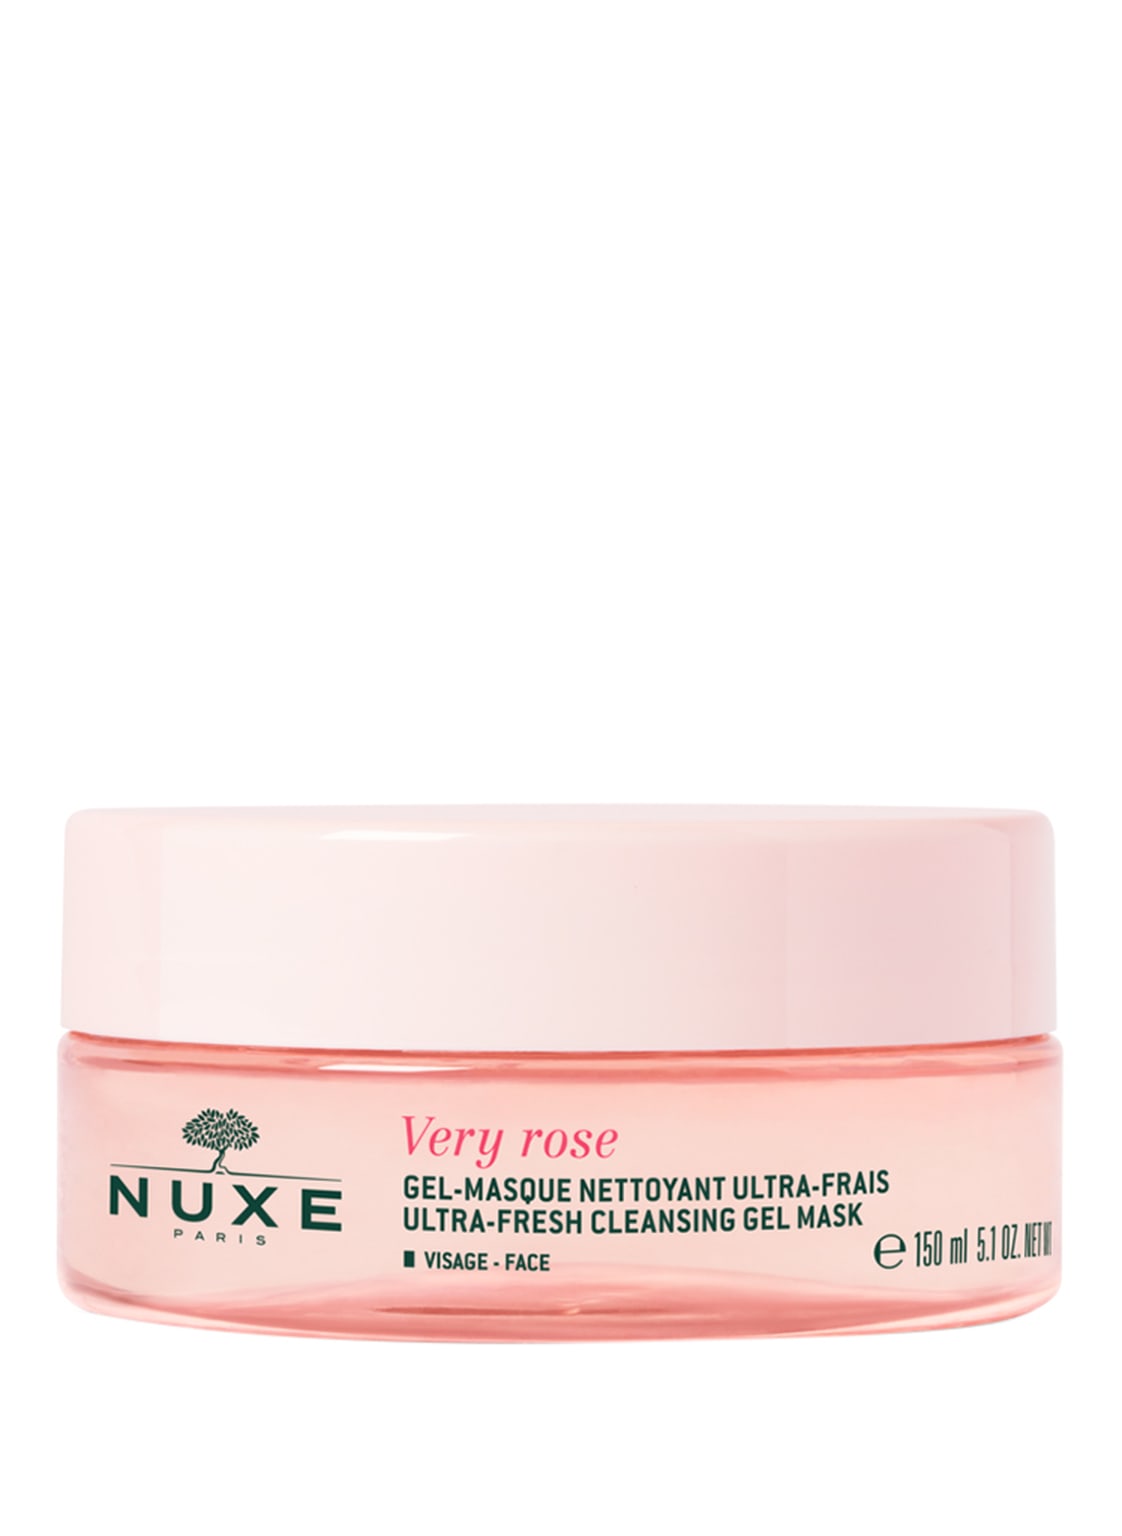 Nuxe Very Rose Ultra-fresh Cleansing Gel Mask 150 ml von NUXE